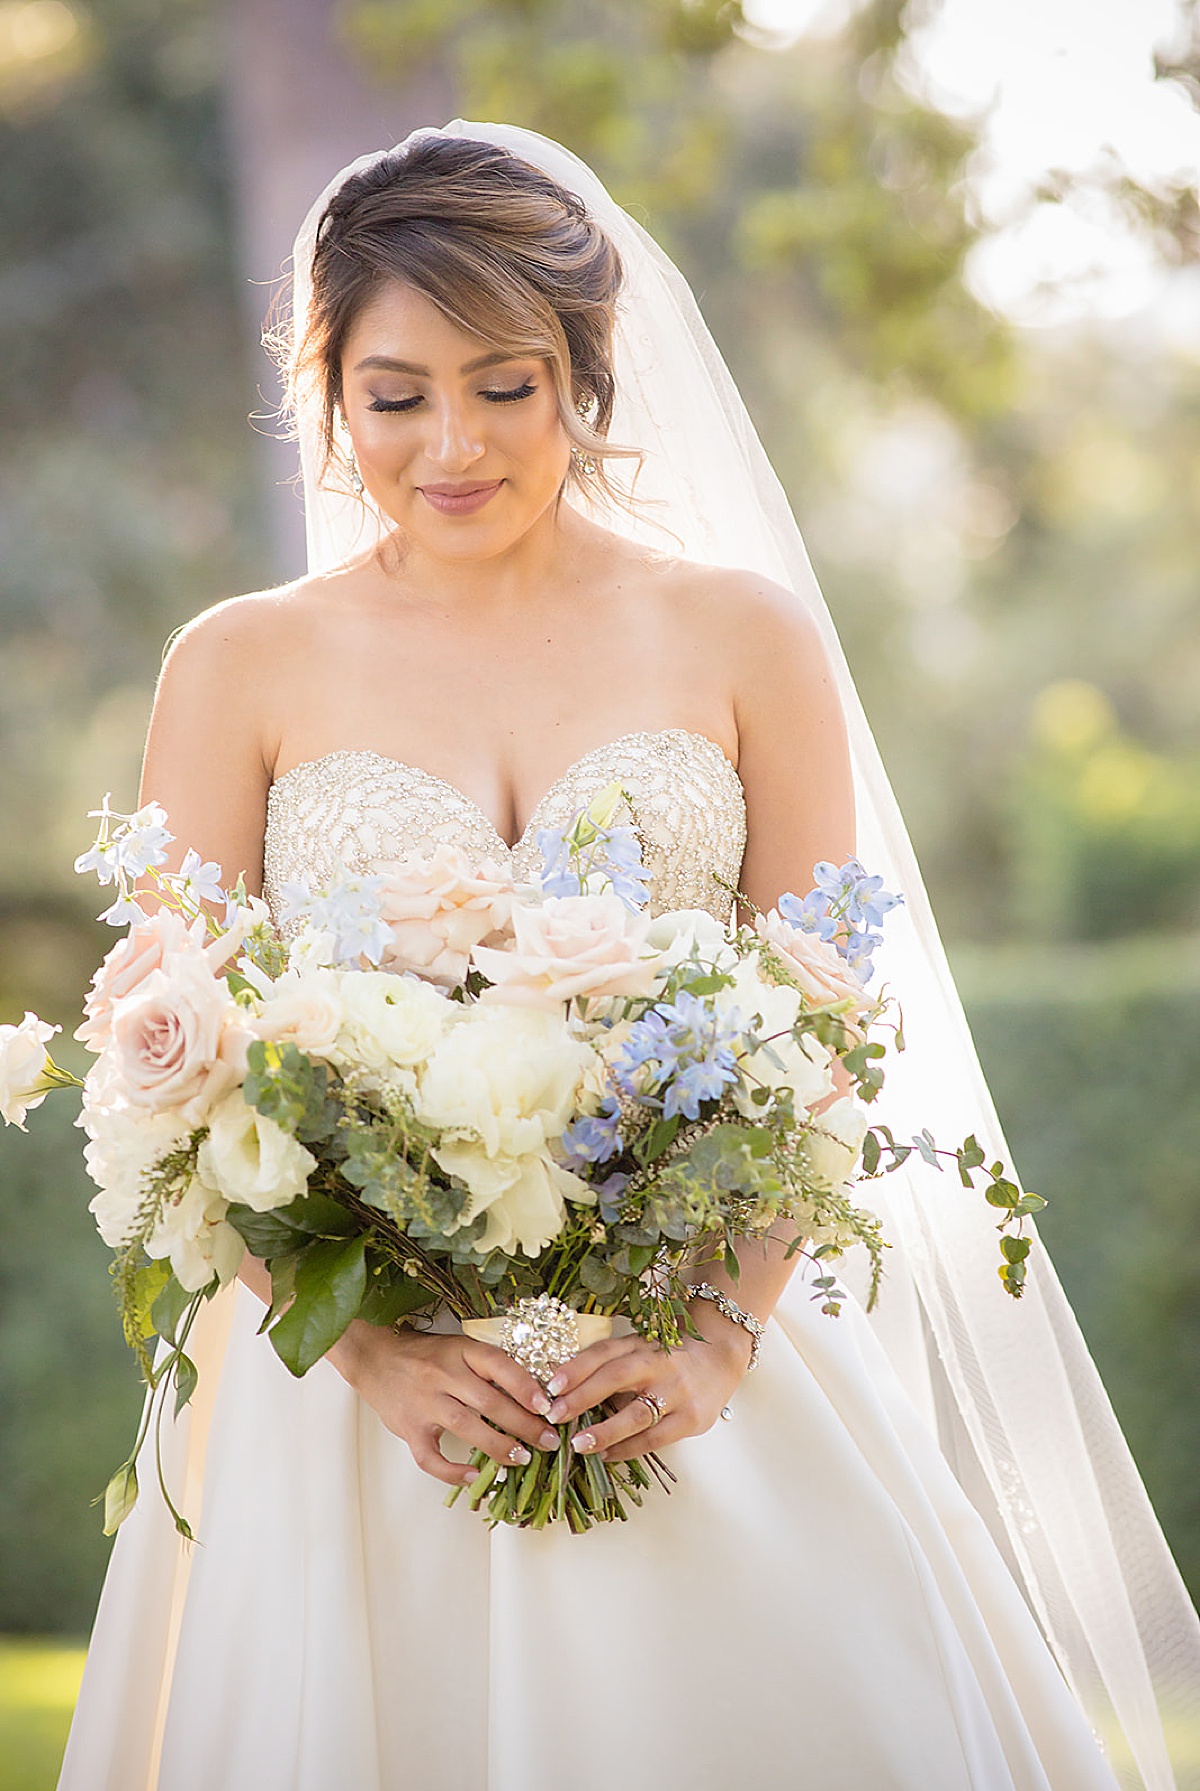 5 Tips For Choosing The Best Flowers For Your Dream Summer Wedding! -  